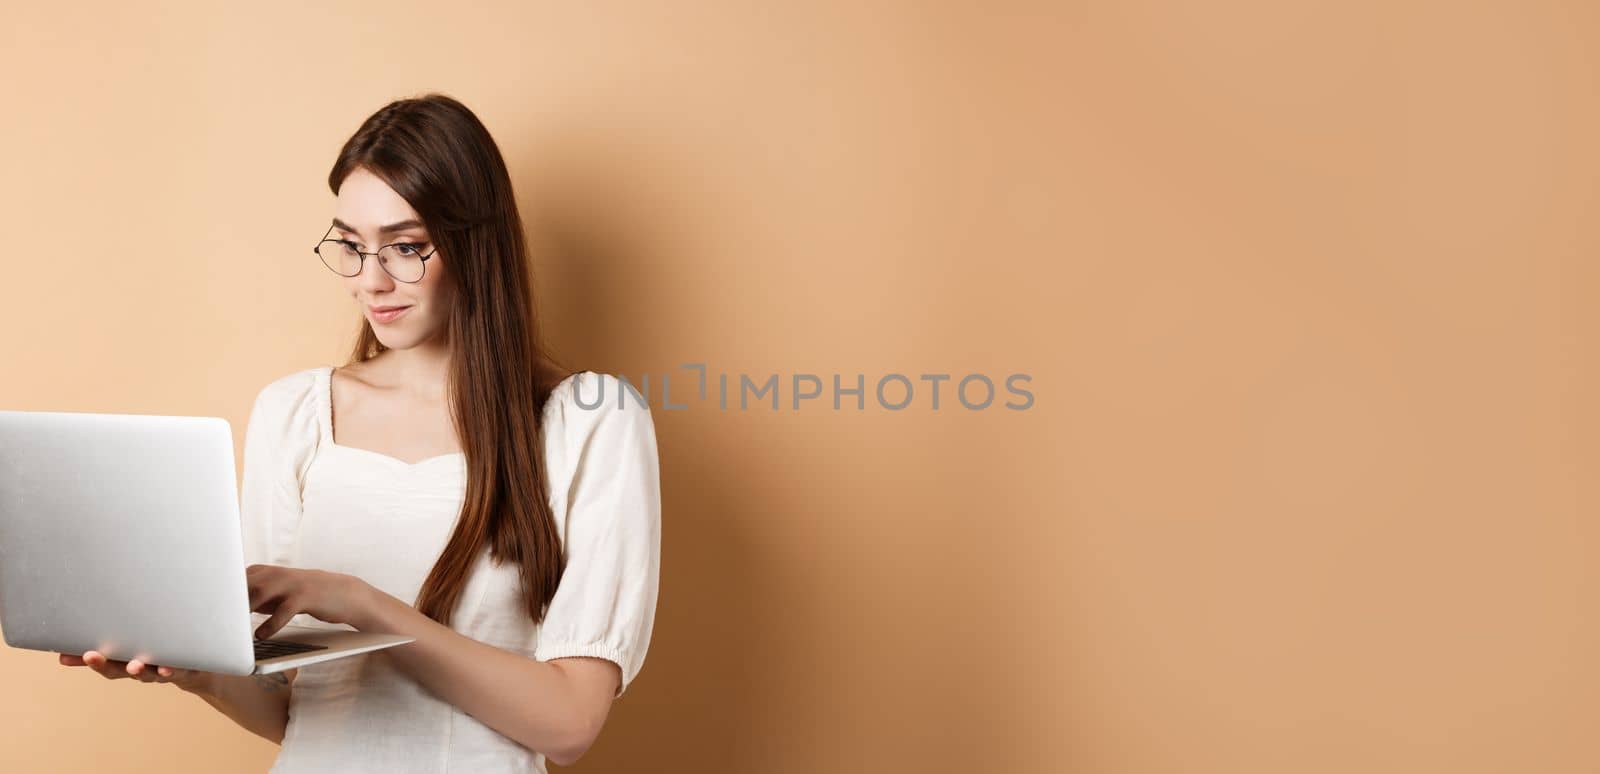 Young woman in glasses working on laptop, reading computer screen and smiling, standing on beige background.